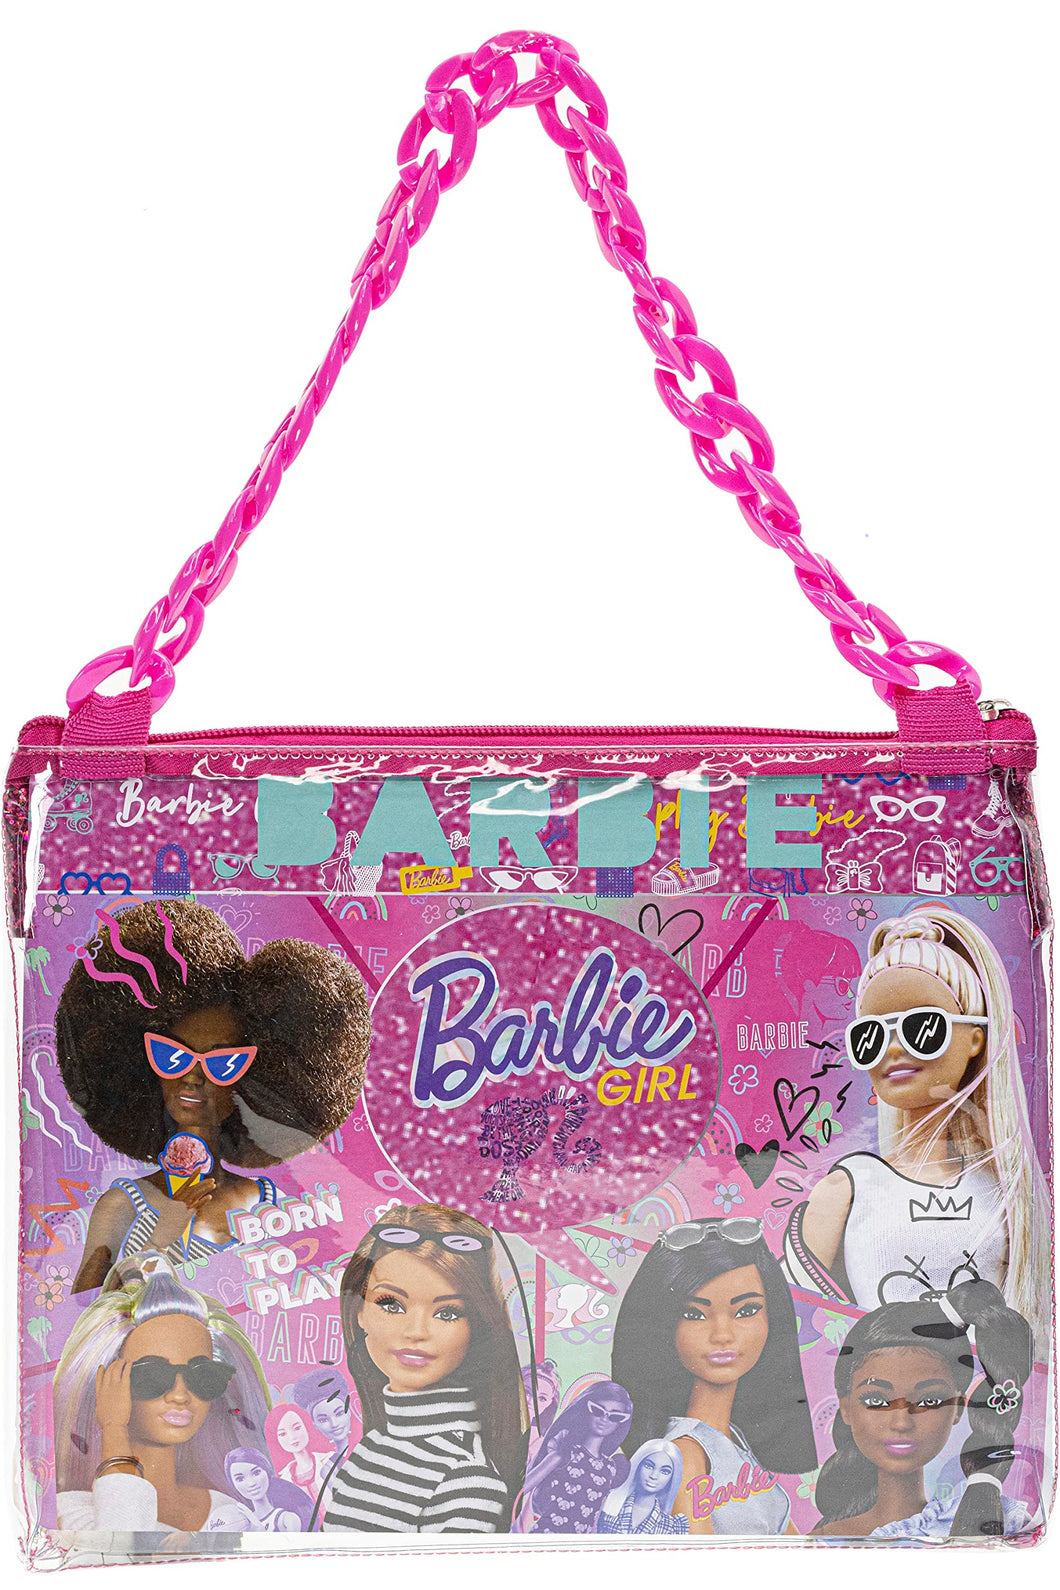 Barbie - Townley Girl- 11 Pcs Makeup Filled Sling Chain Bag with Peel- Off Nail Polish, Eyeshadow, Hair Accessories, Body Glitter & More| Makeup Kit for Kids & Girls| Ages 3